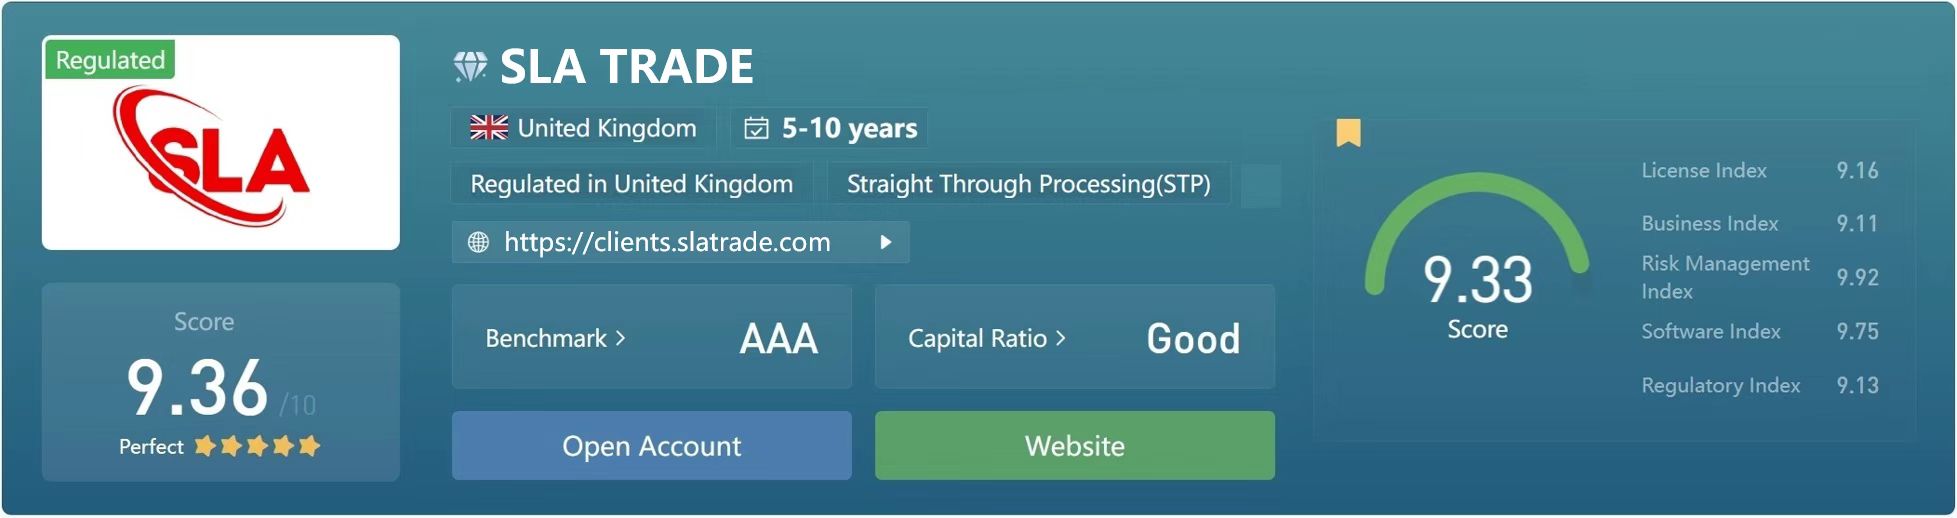 SLA Trade Group Comprehensive Review: A Trusted Online Trading Partner